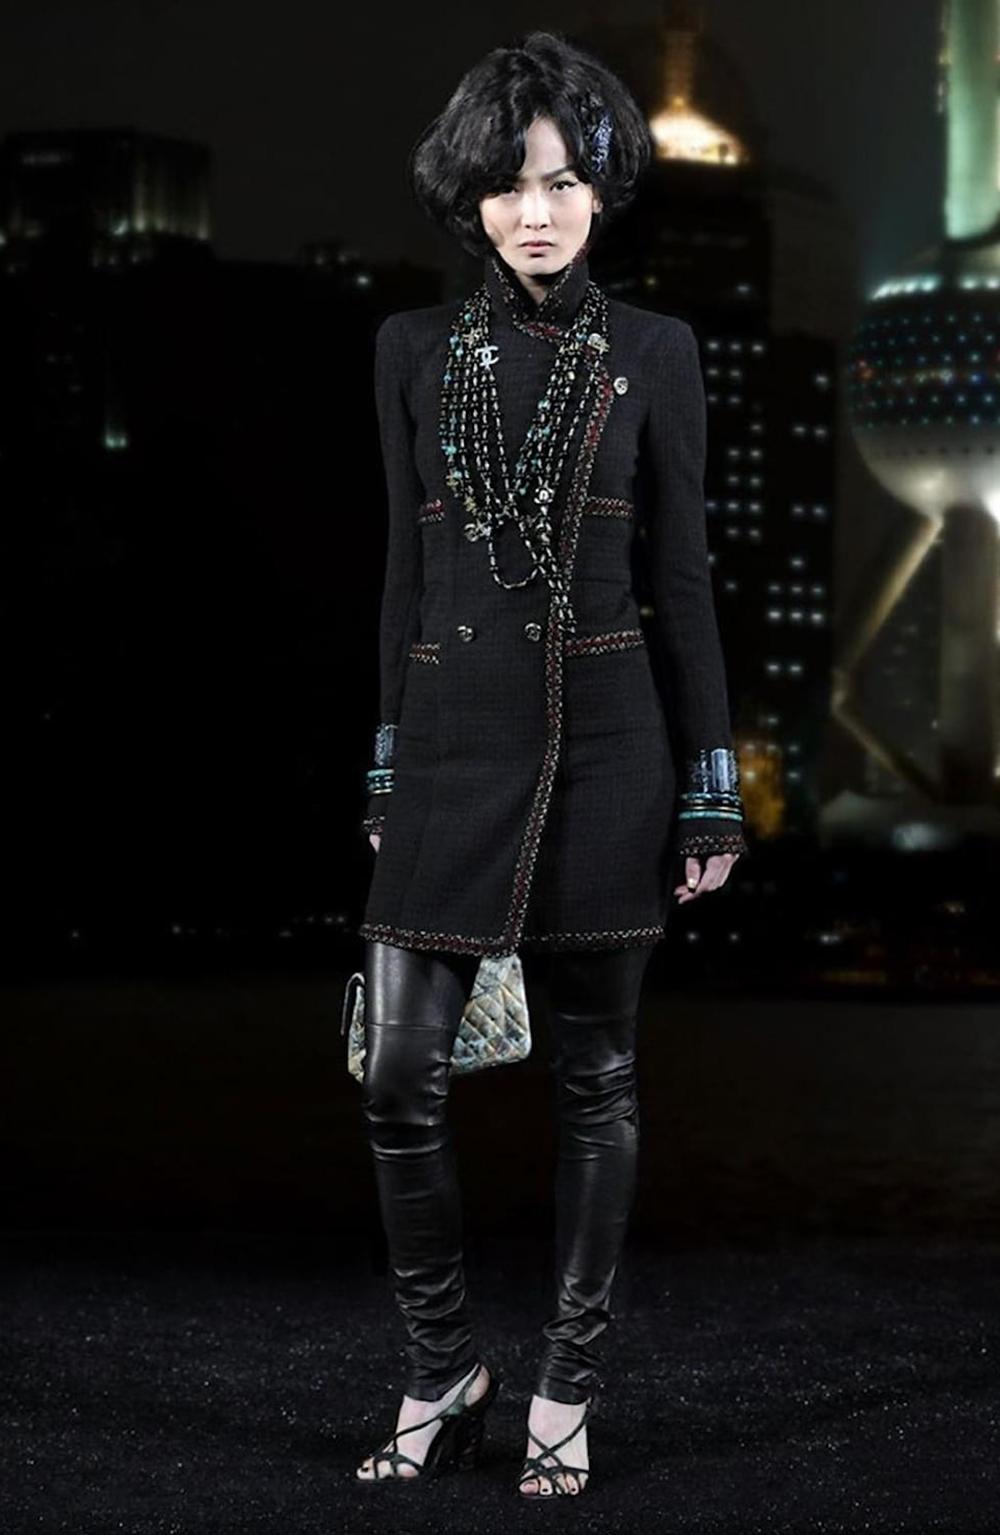 Collection Chanel black tweed double-breasted coat dress from Ad Campaign of Paris / SHANGHAI Collection, 2010 Metiers d'Art
Boutique price over 10,000$. Size mark 38 FR. Never worn.
- CC logo ancient 'coin' buttons
- black silk lining
- signature